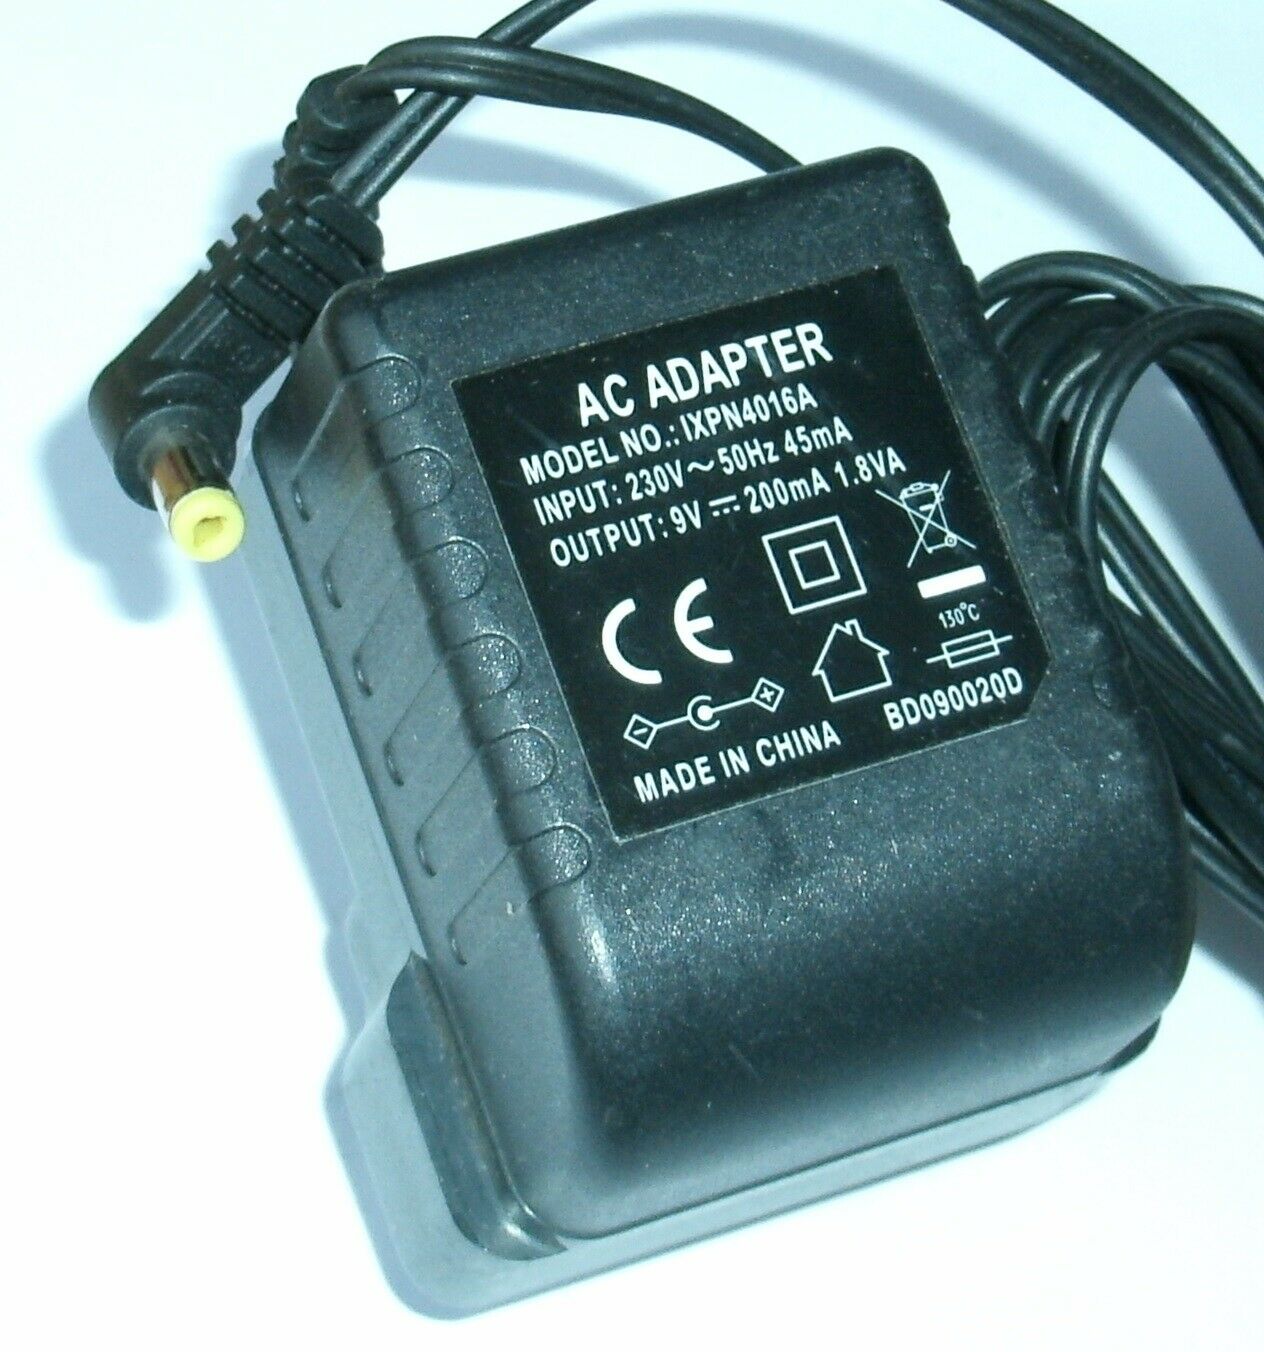 New 9V 200mA BD090020D IXPM4016A Power Supply AC ADAPTER